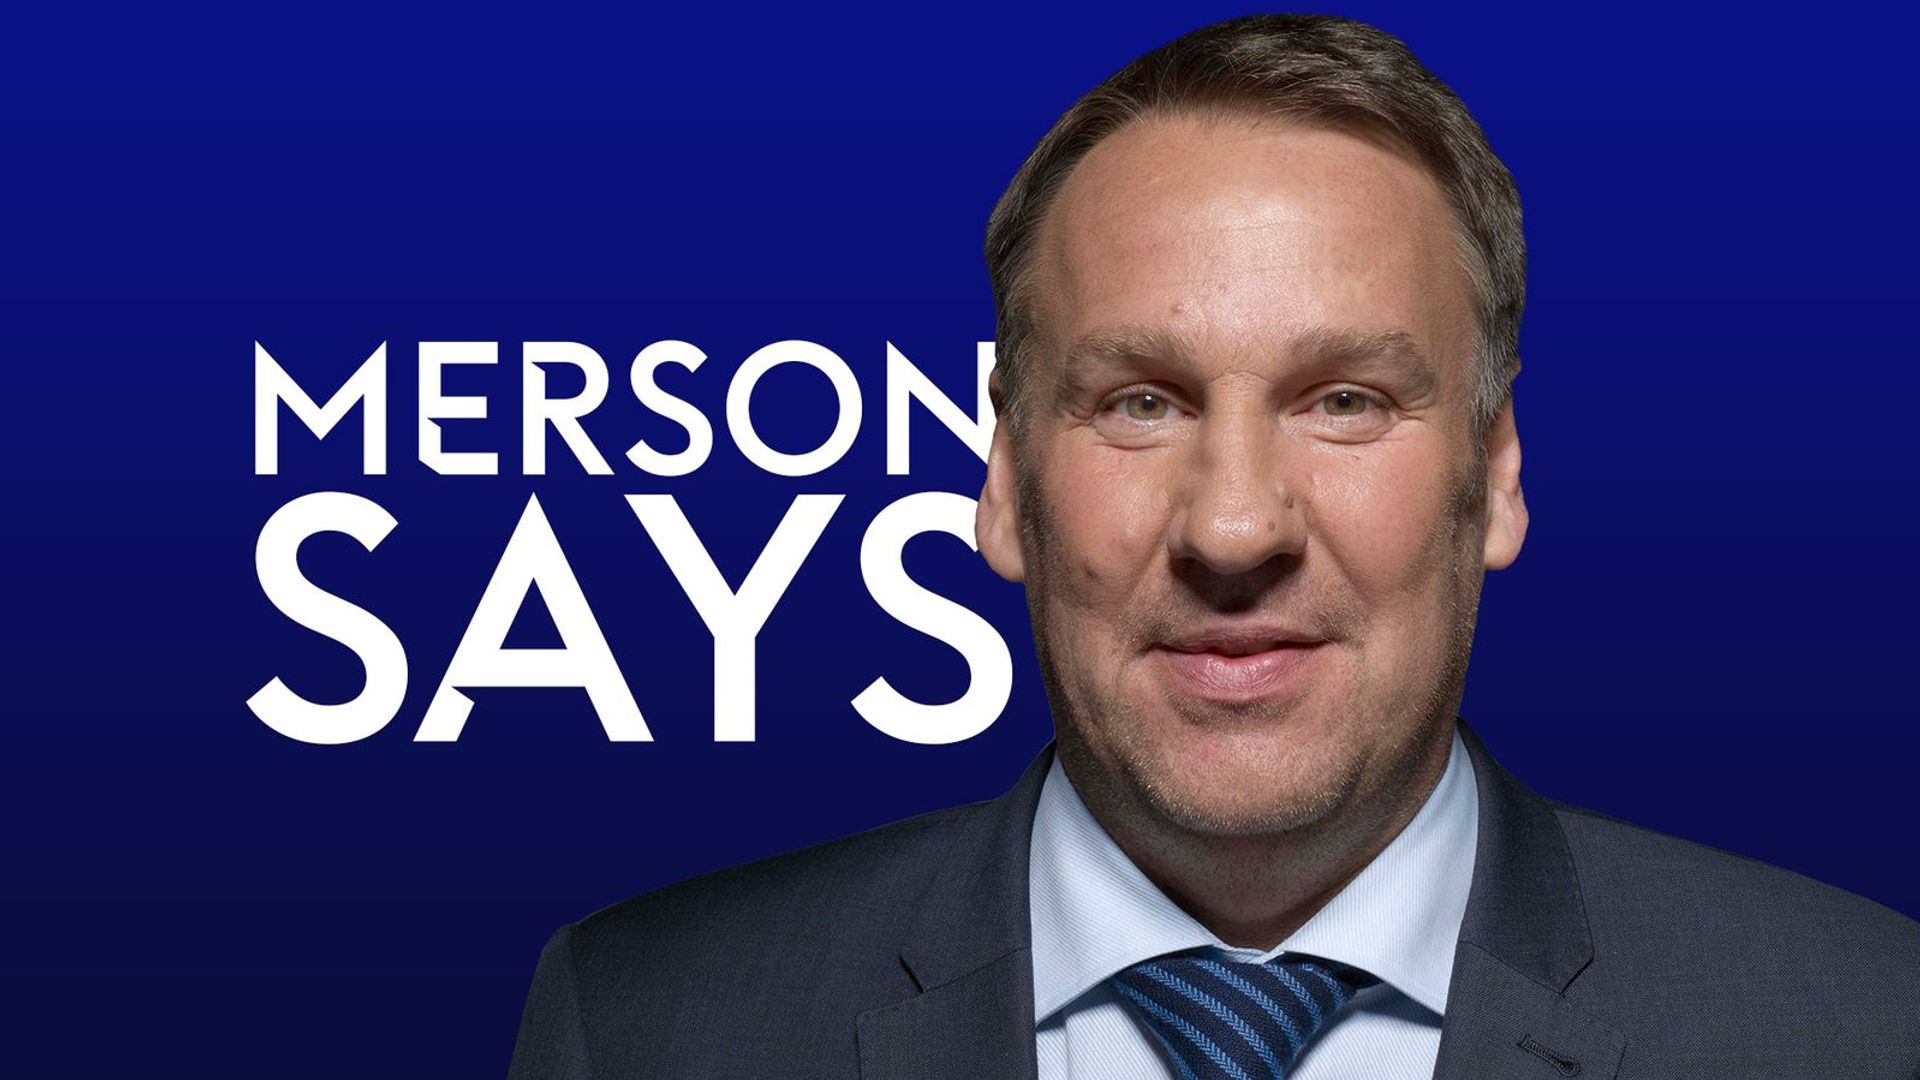 Merson Says: Potter would be 'distant memory' in Chelsea's Abramovich era